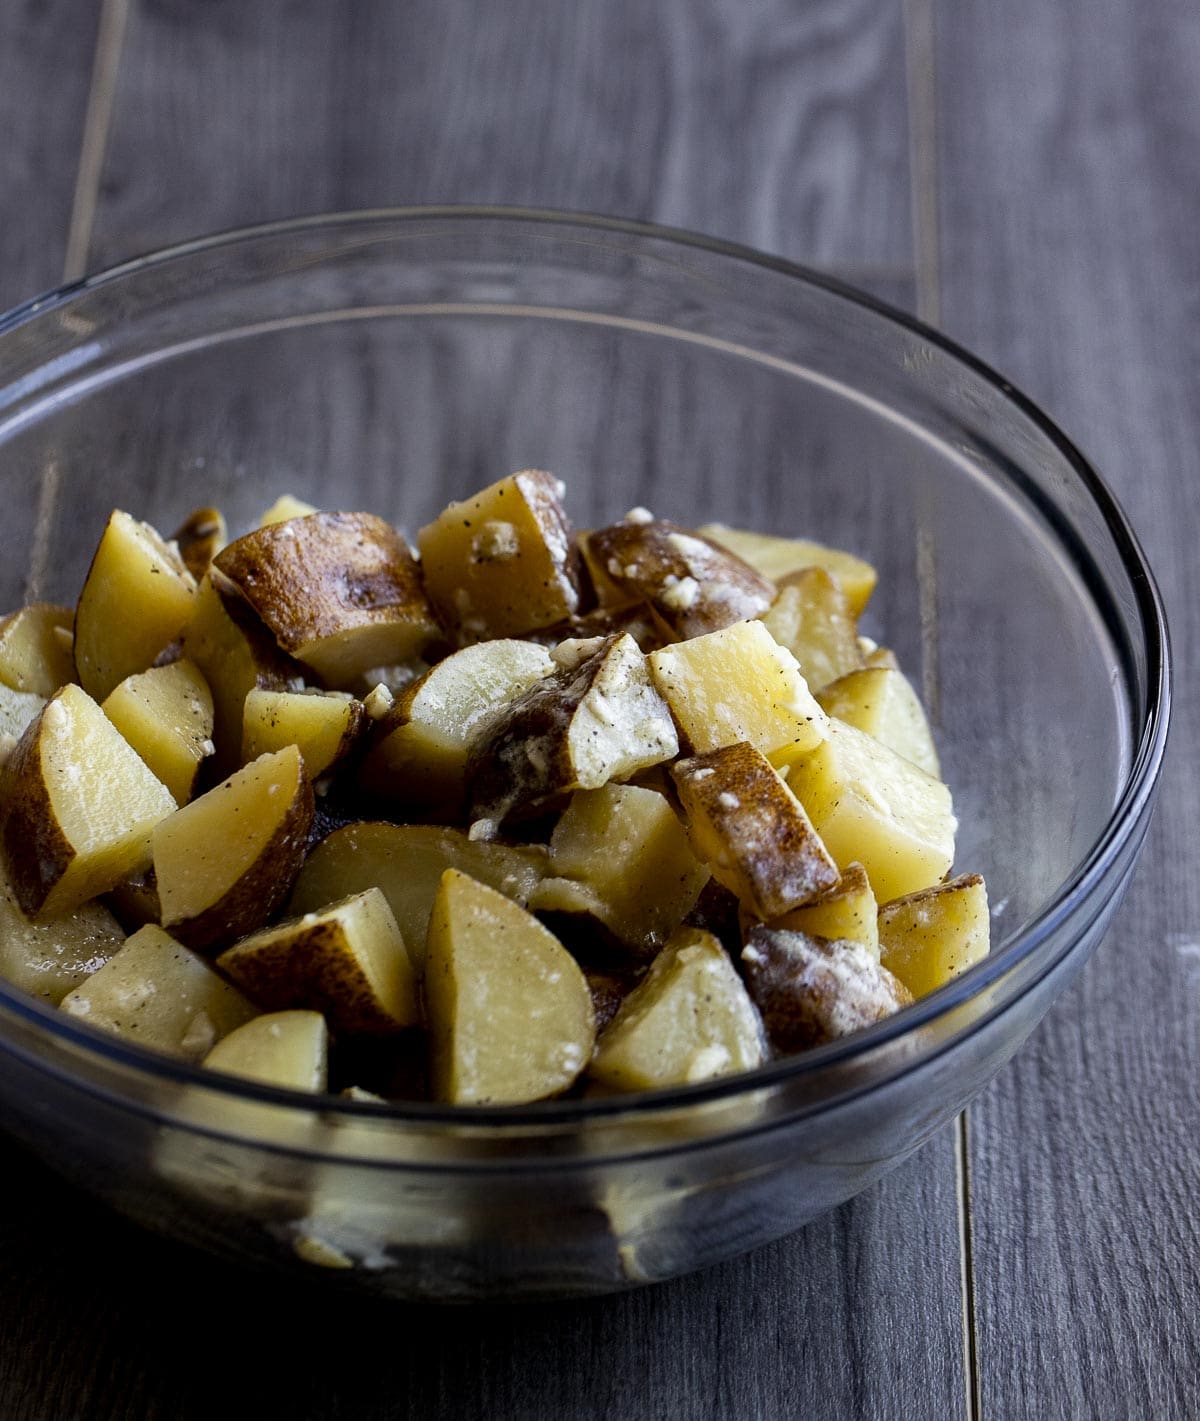 Cubed potatoes in a glass bowl.